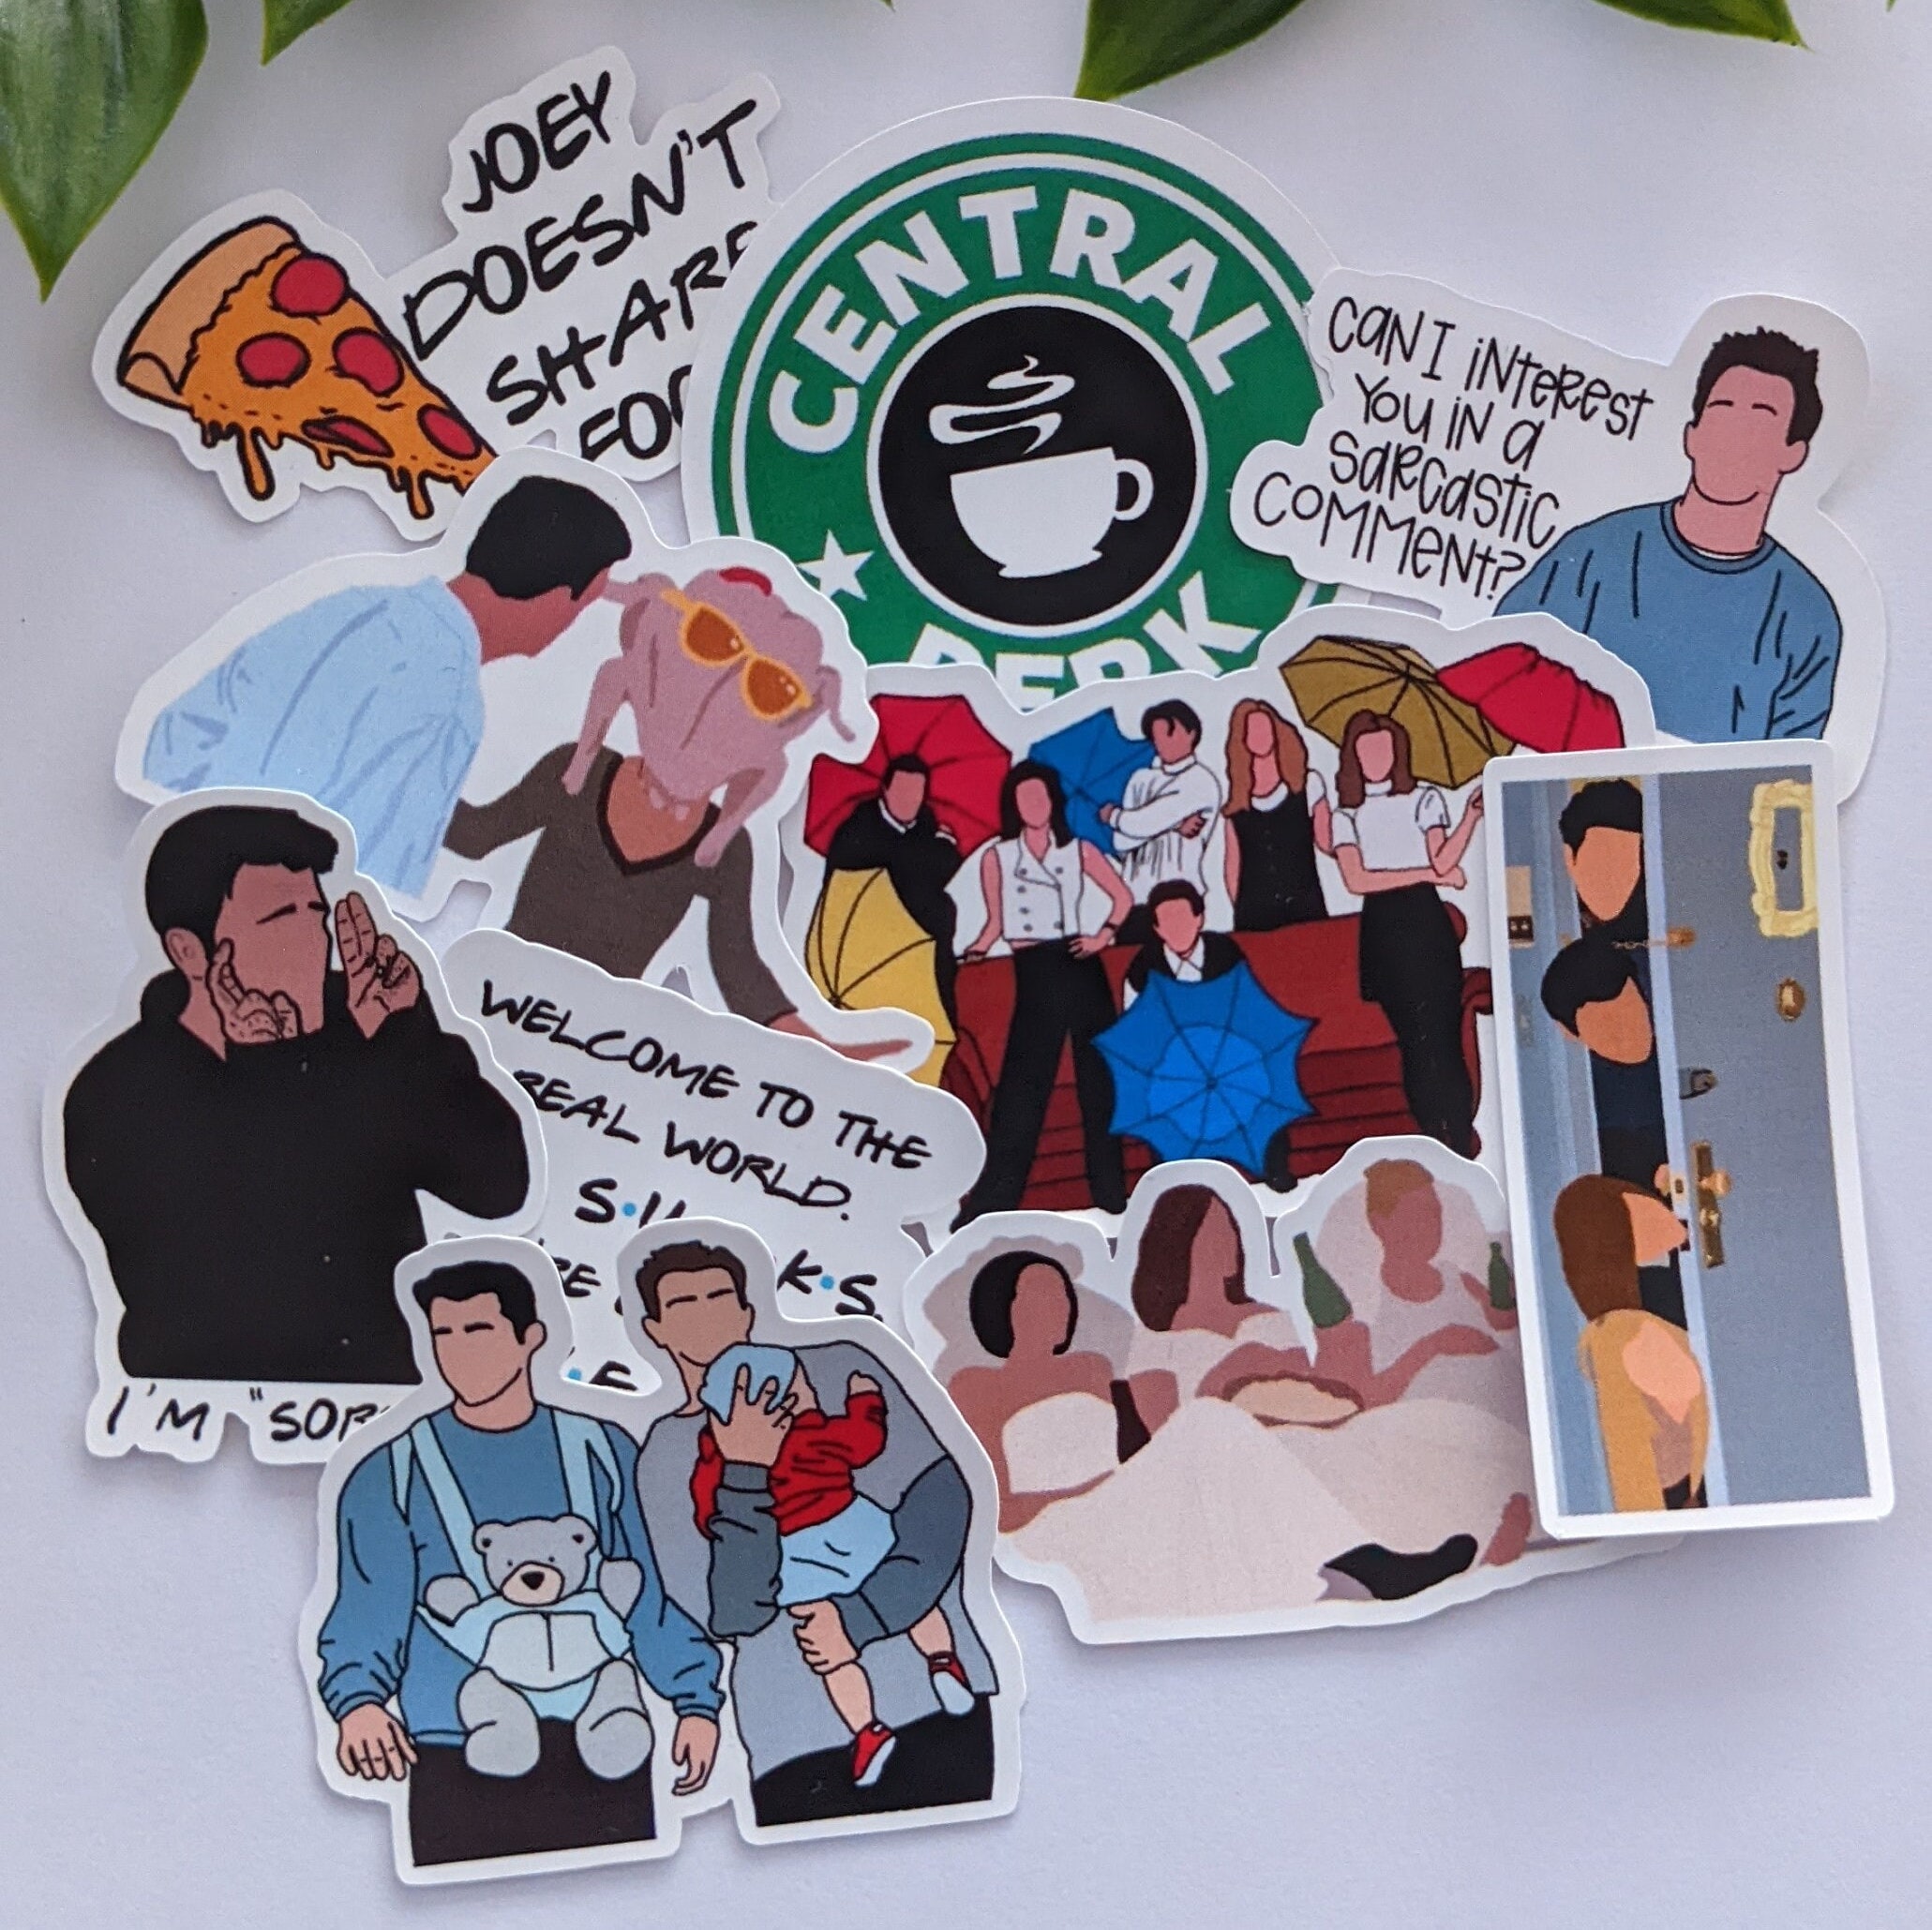 Friends Stickers Vinyl Stickers Bundle Funny Stickers Pack